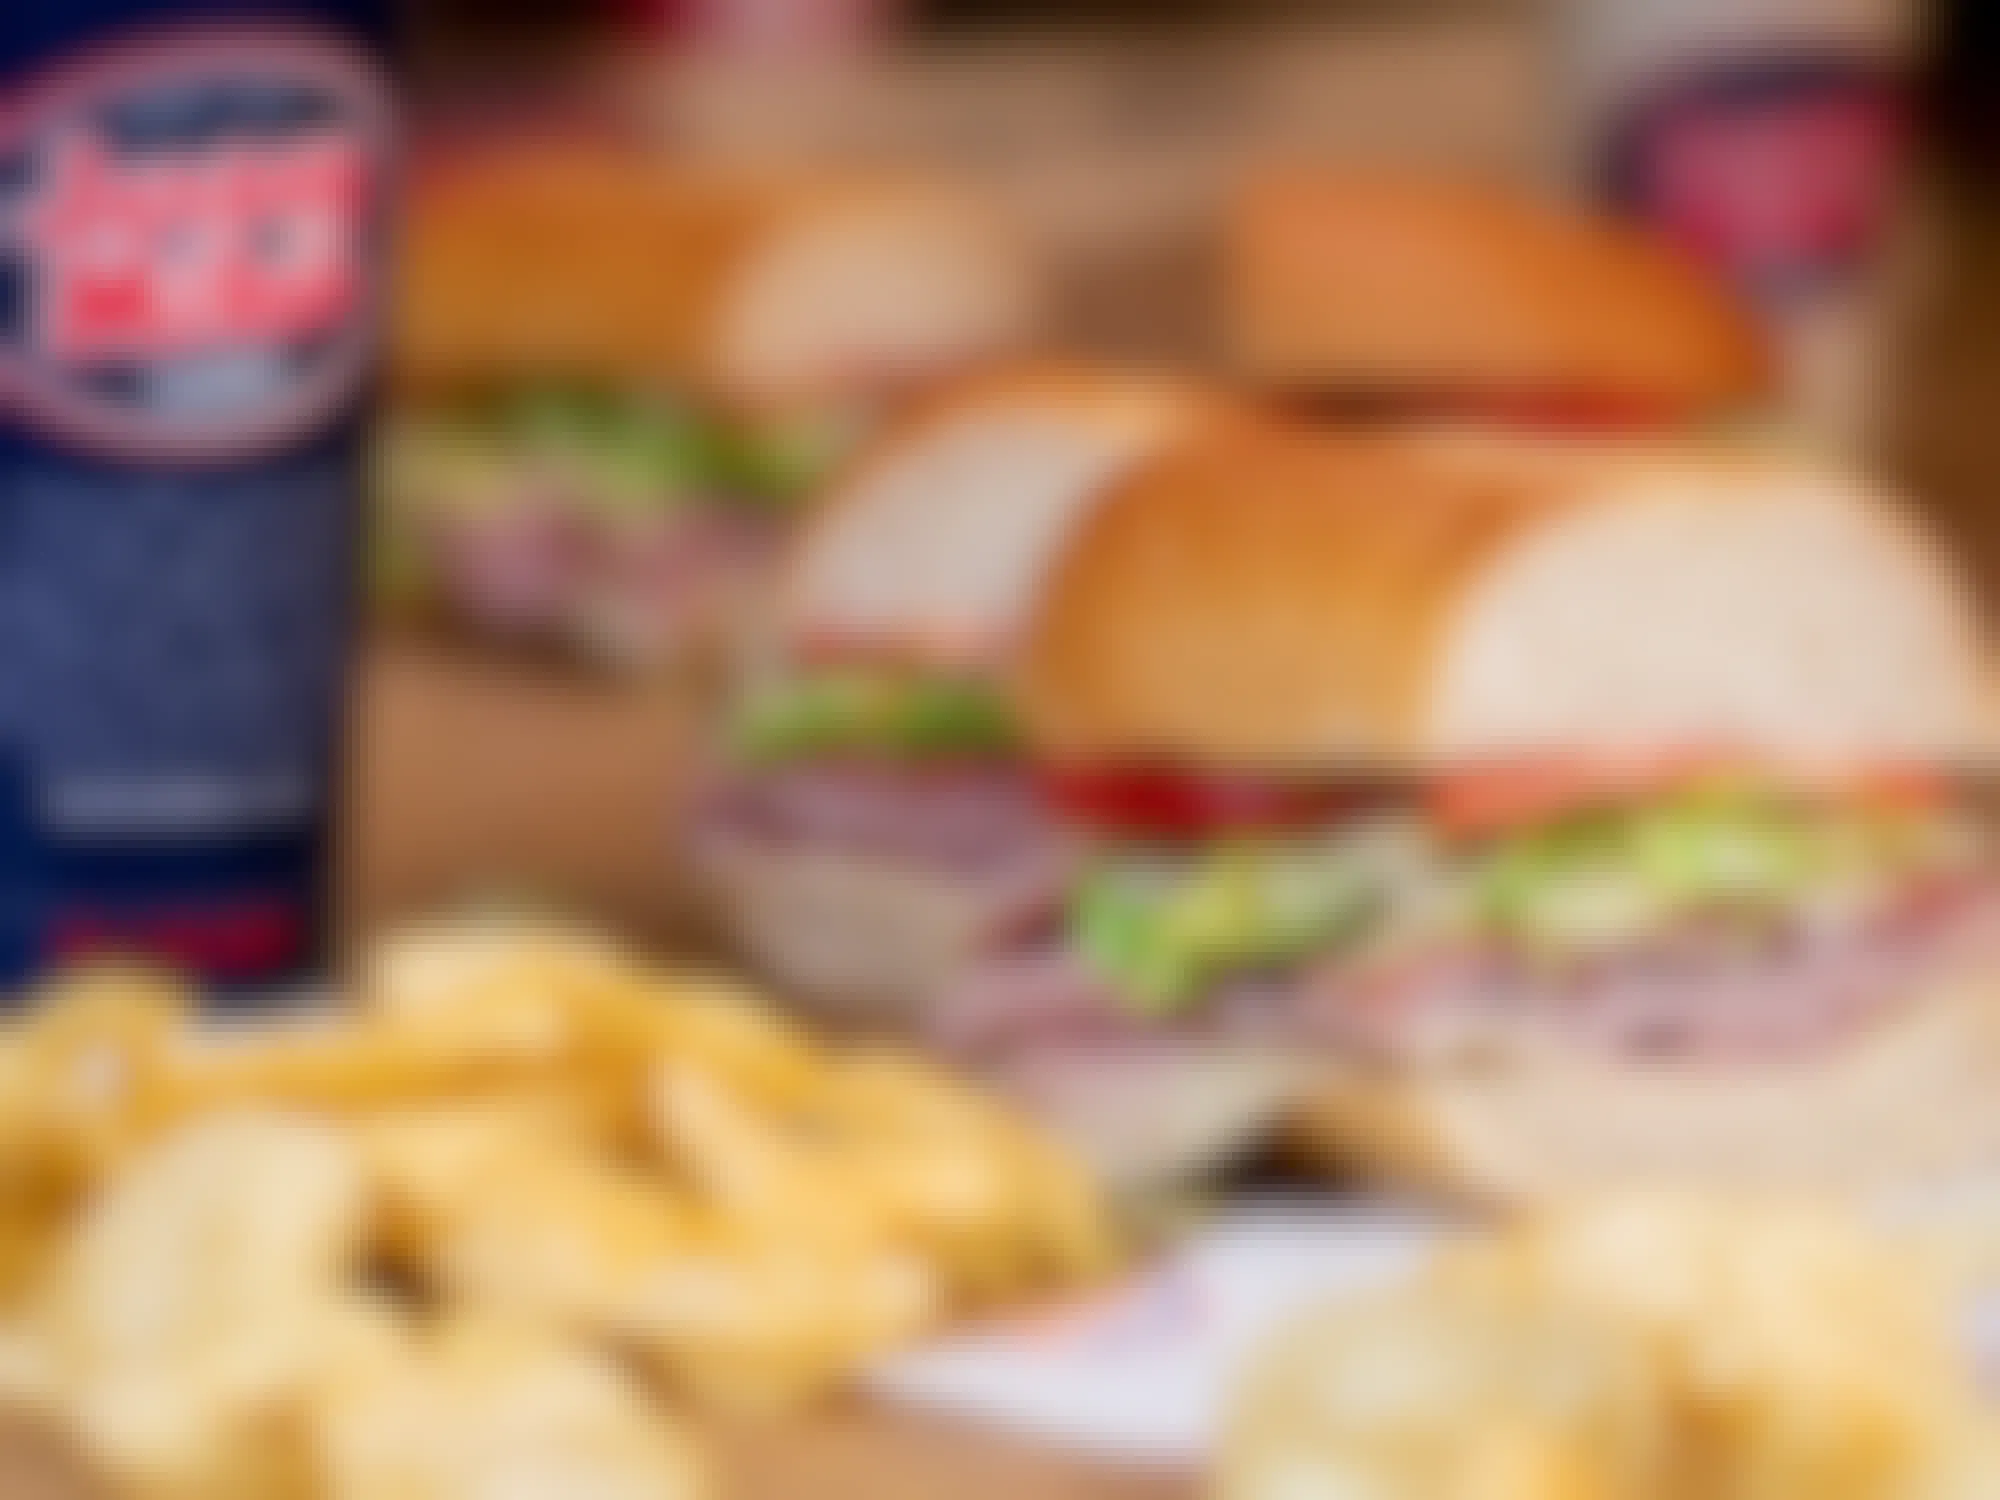 A close up on a Jersey Mike's sub